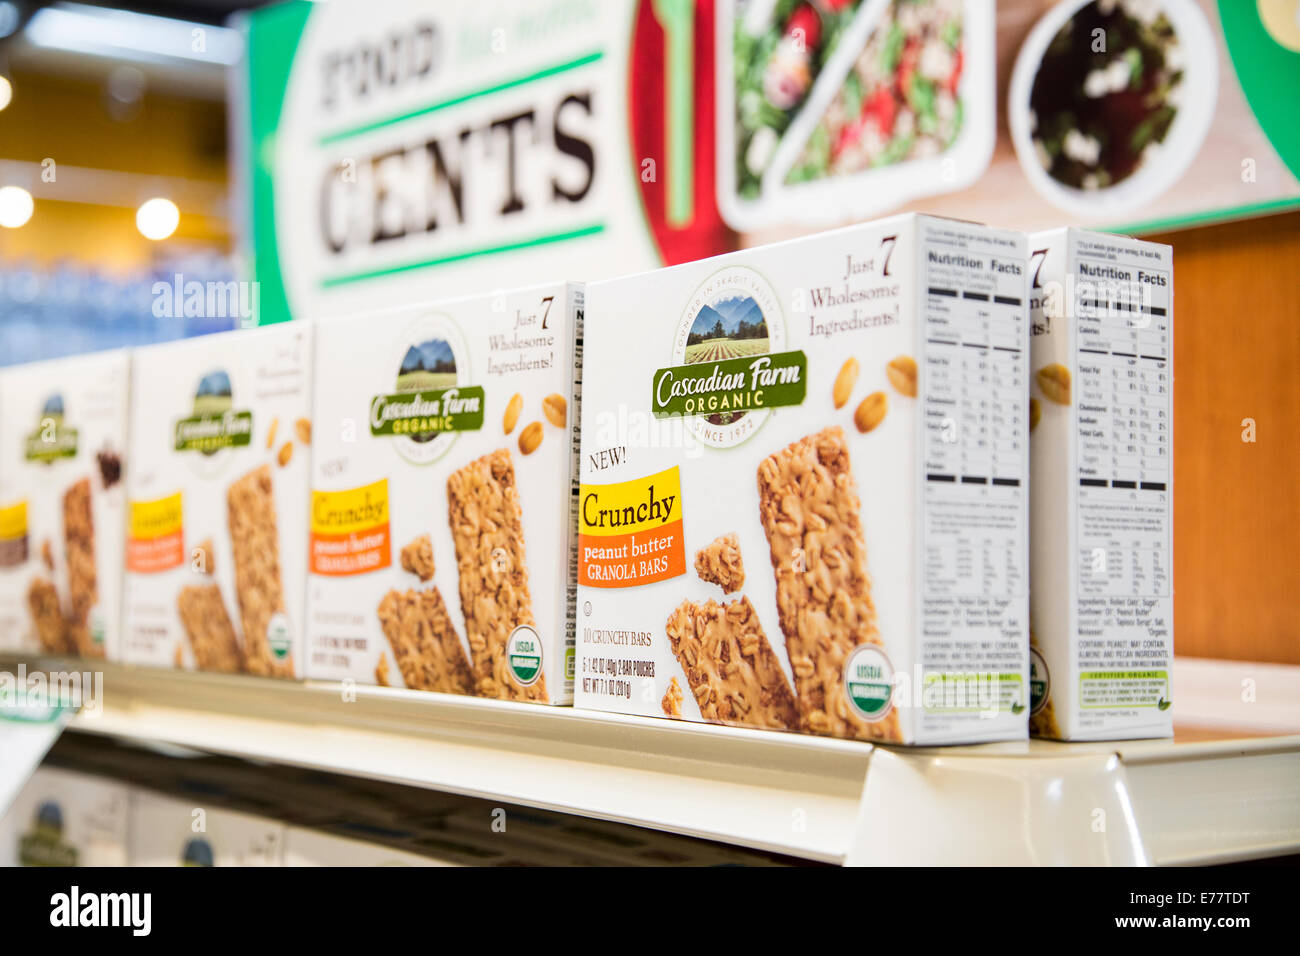 A natural foods grocery store aisle with a shelf of organic granola bars. Stock Photo